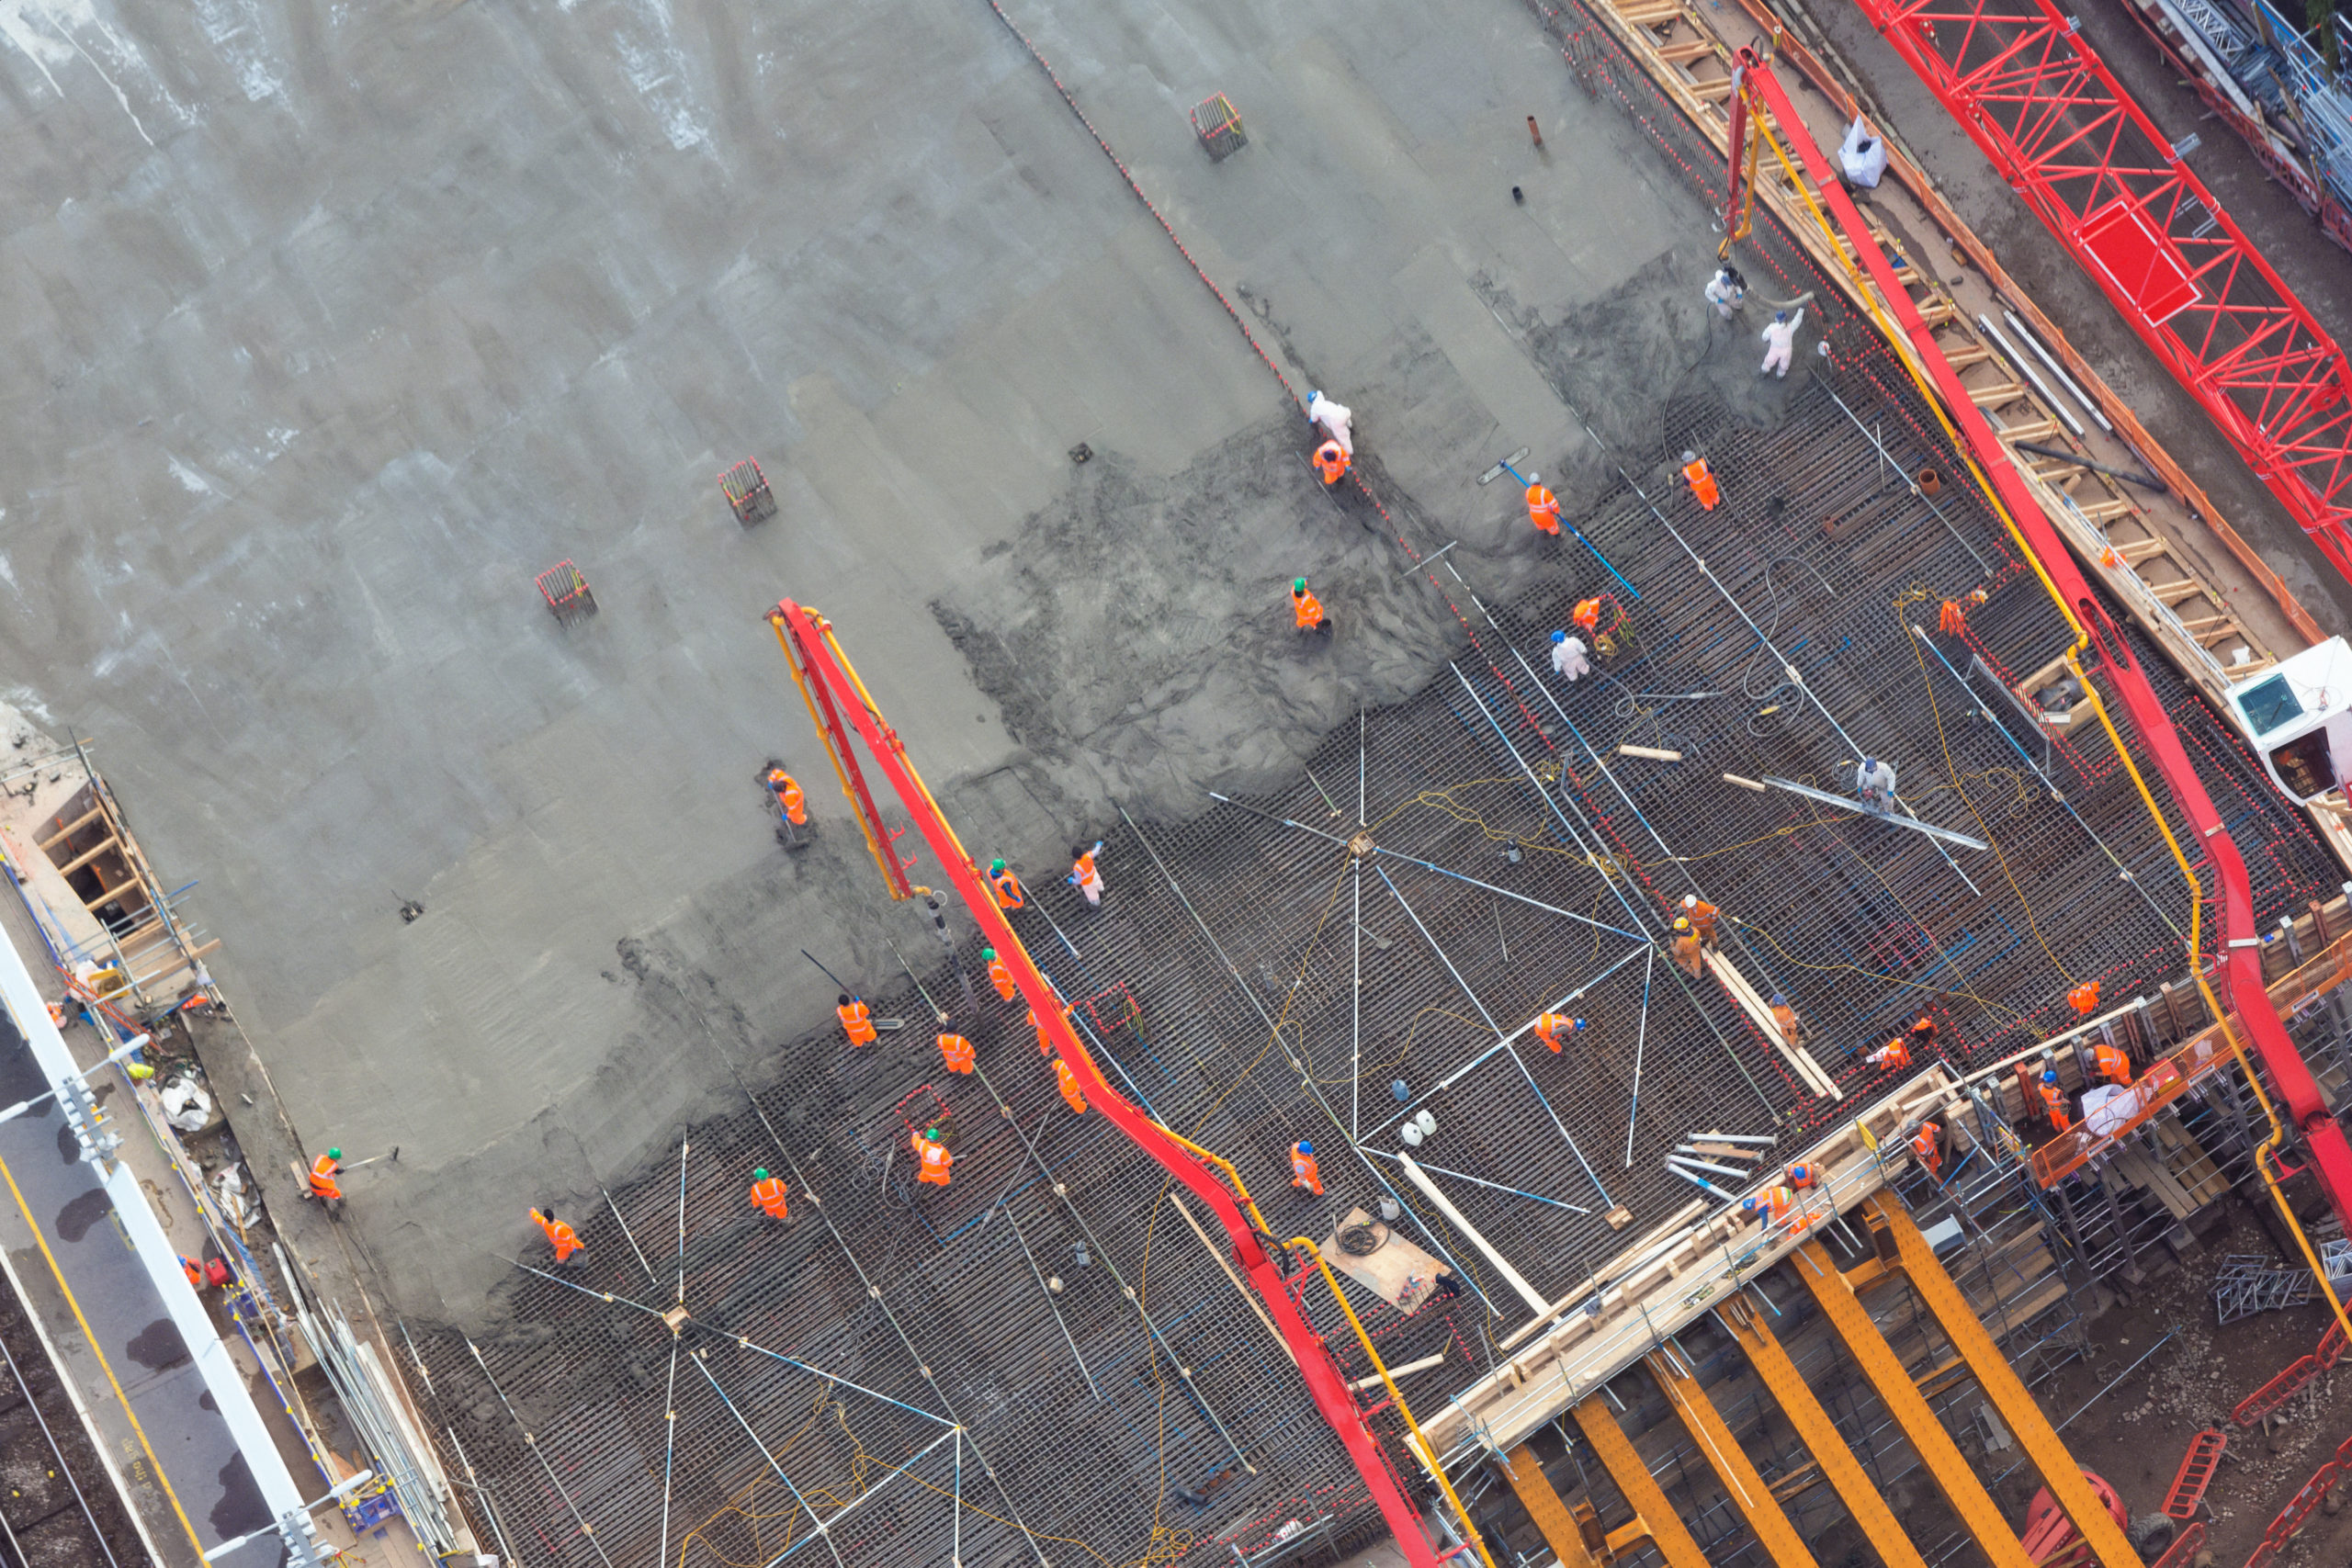 Workers are spreading concrete across a structure.